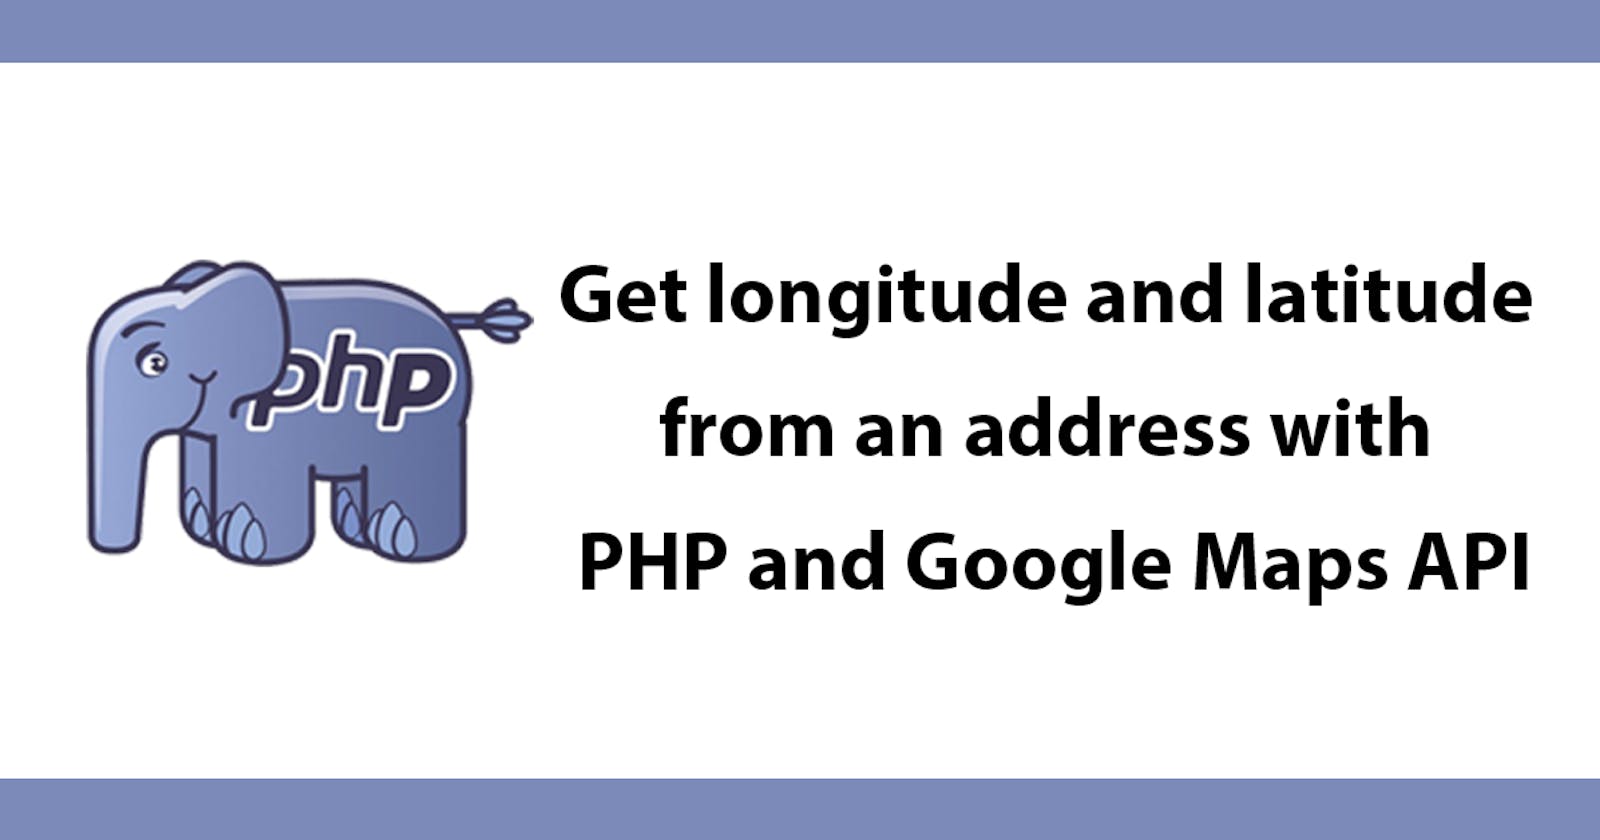 Get longitude and latitude from an address with PHP and Google Maps API